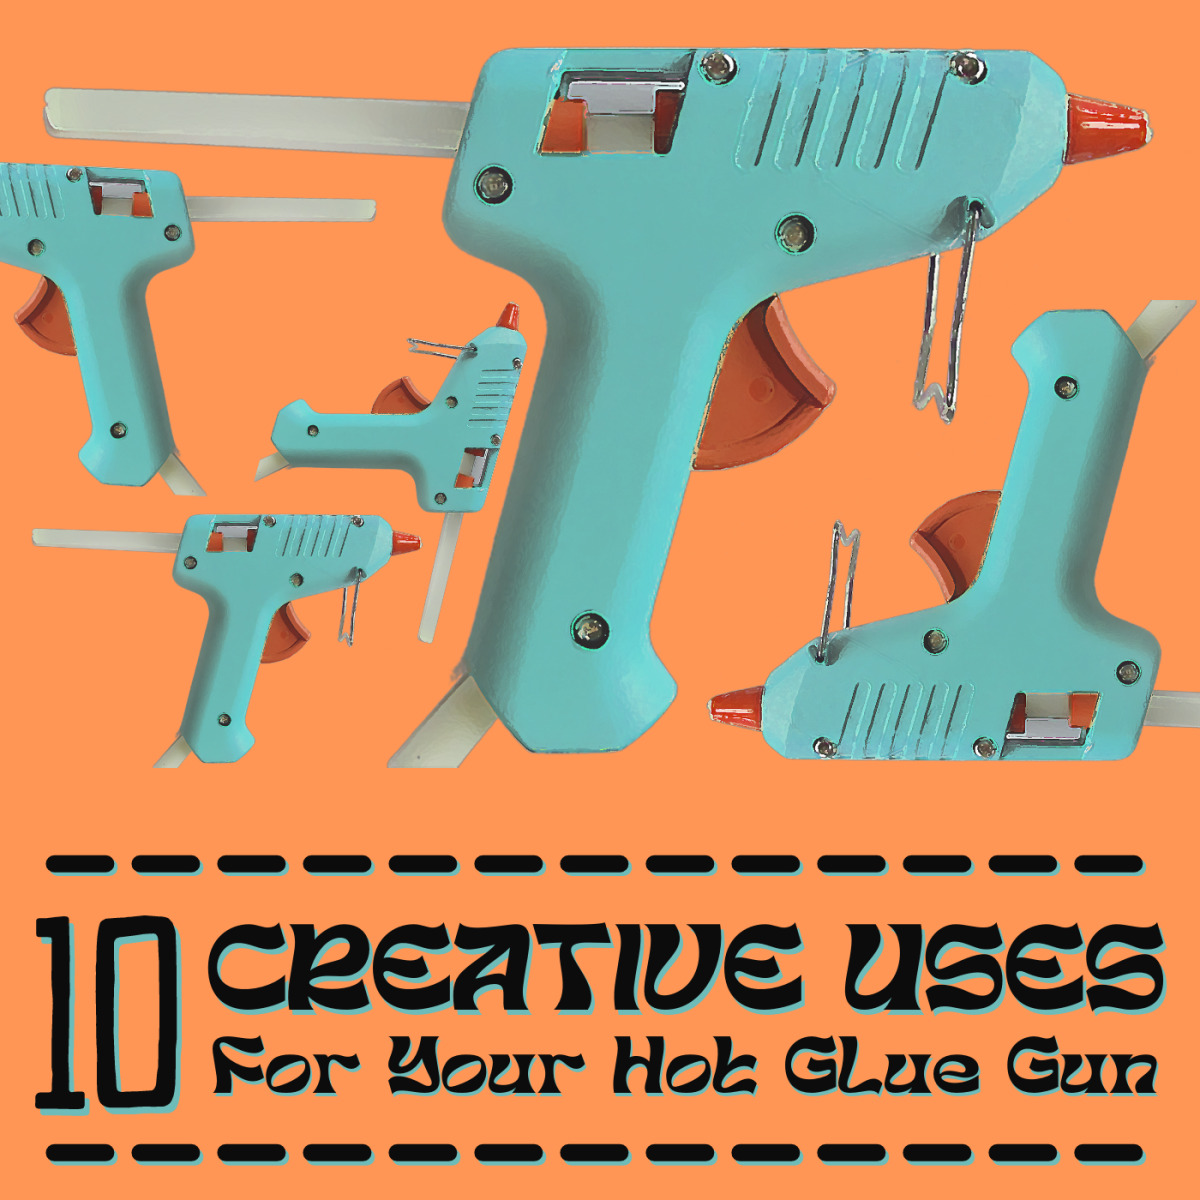 What To Do With A Hot Glue Gun